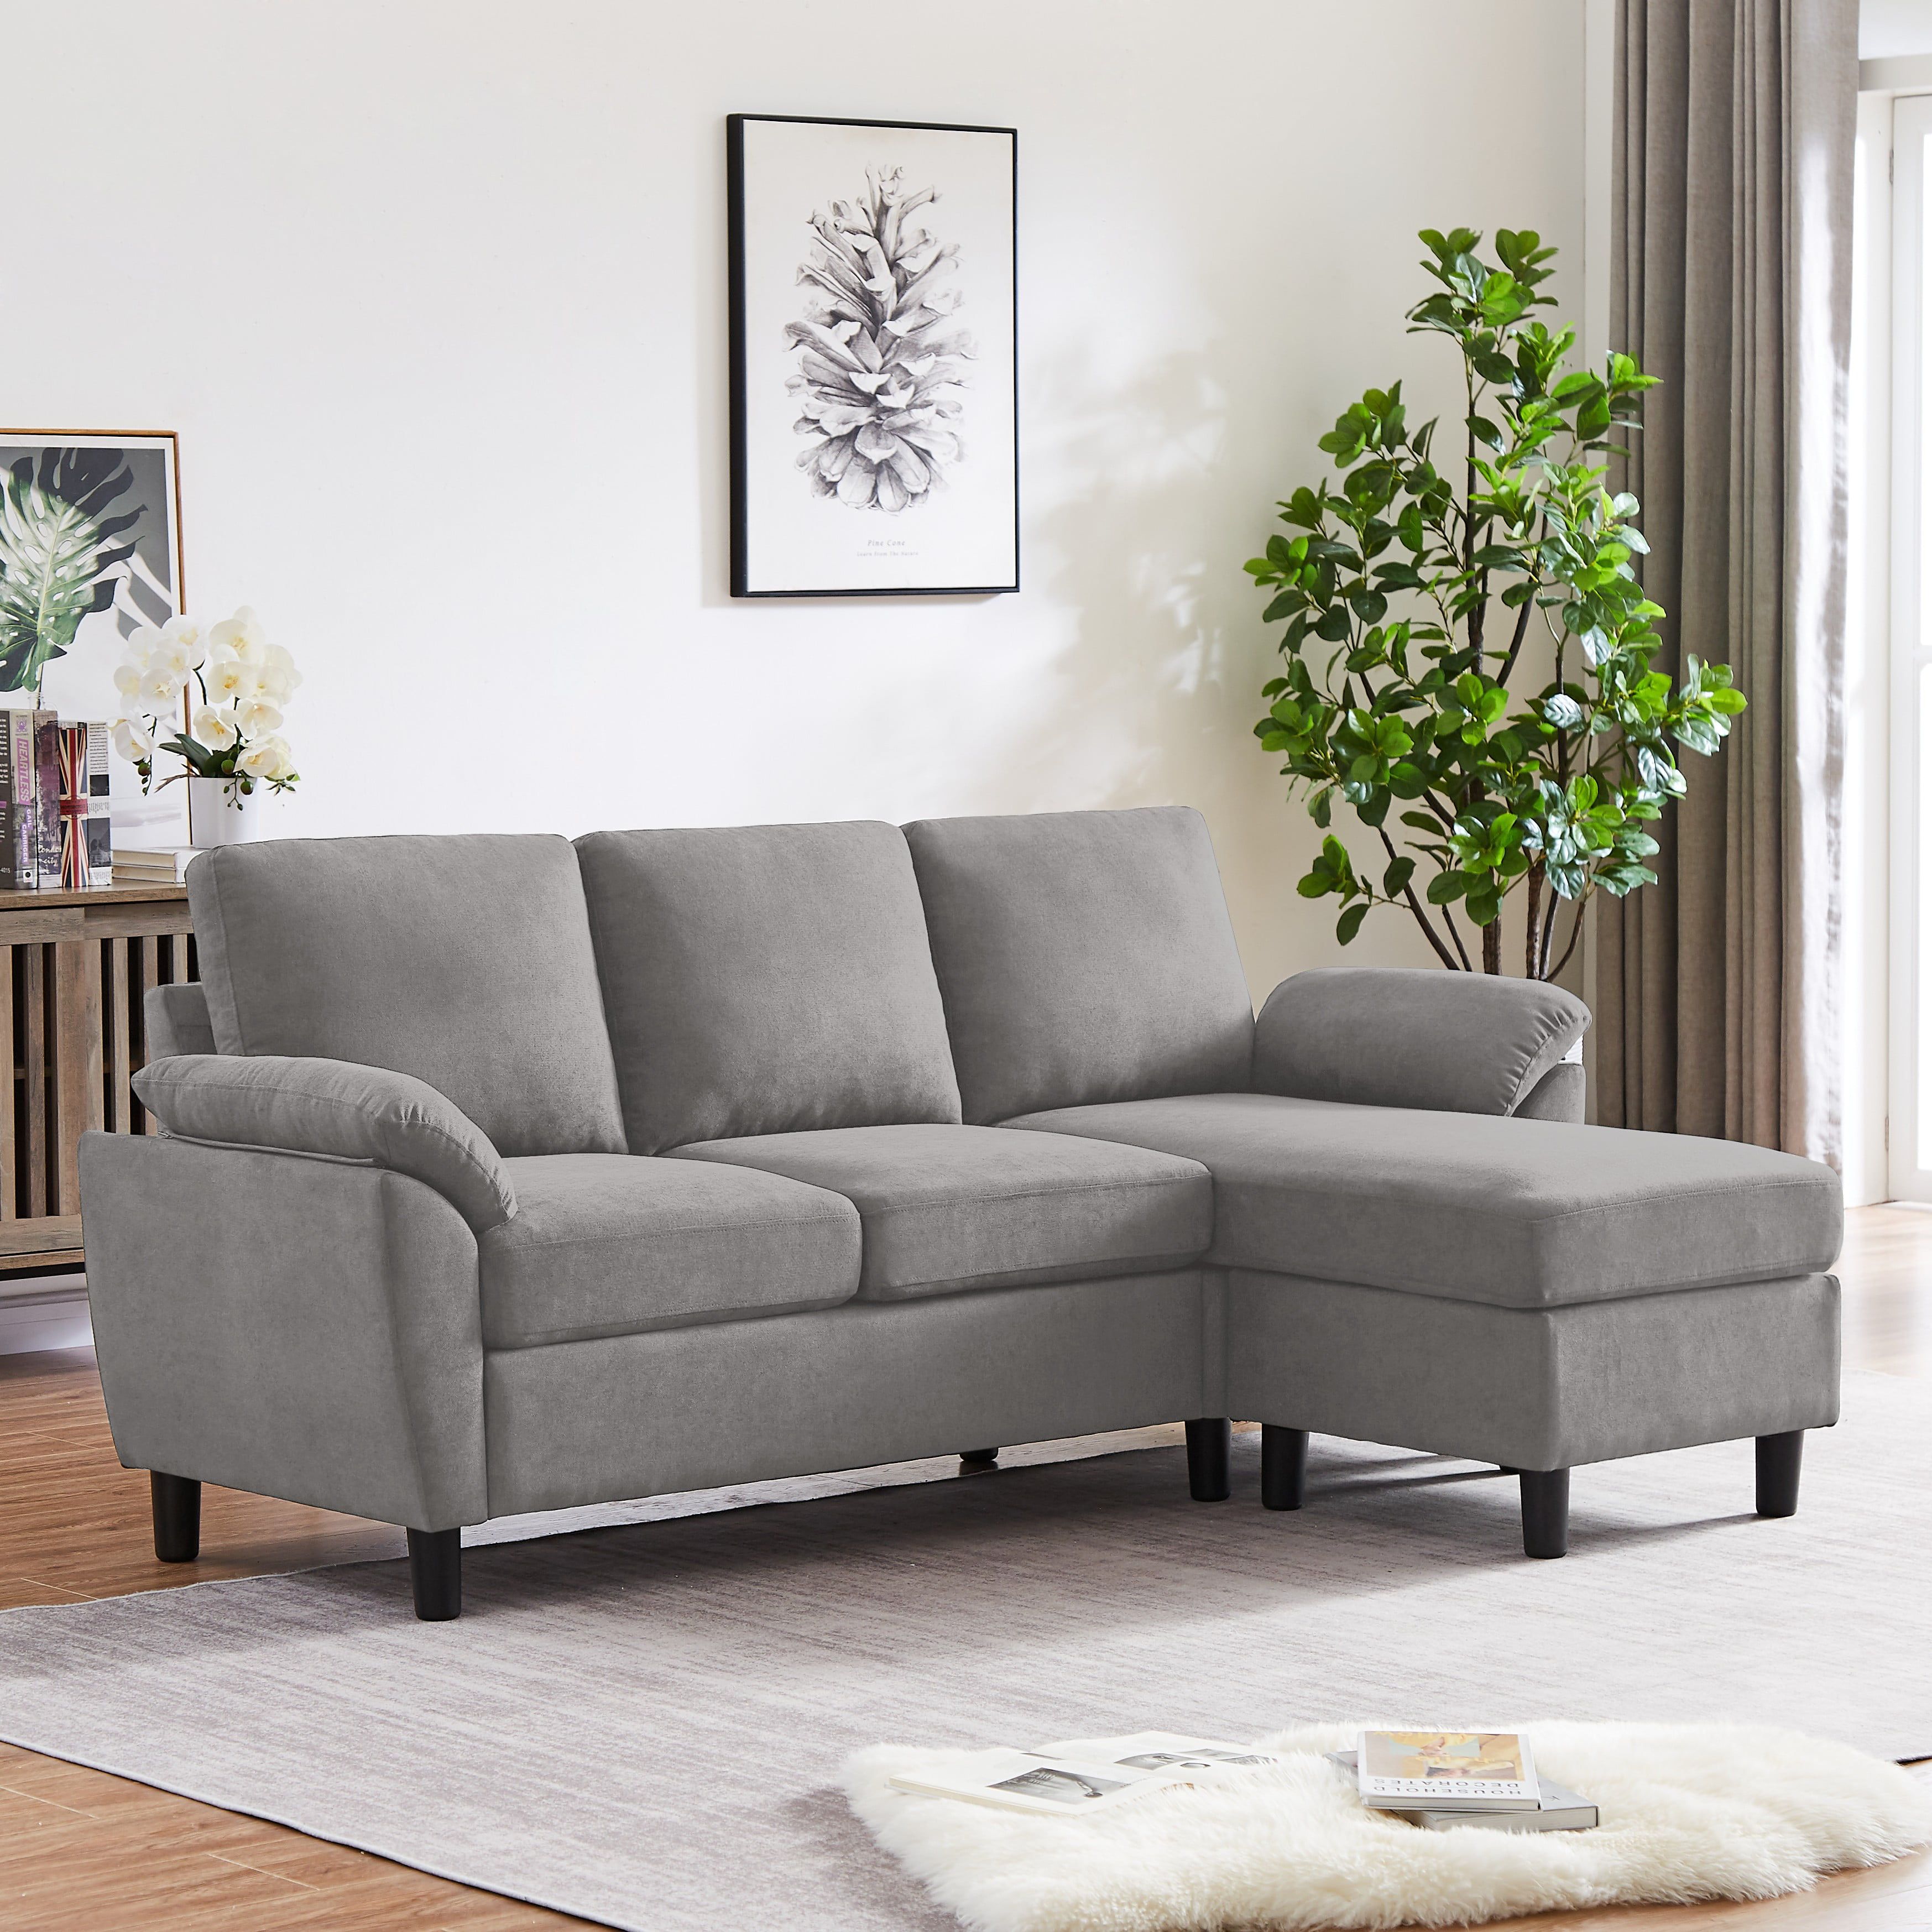 Jarenie Modern Fabric L Shapped Sofa Sectional Couches For Living Room Convertible  Sofa With Matching Chaise For Office, Apartment, Studio – Walmart With Convertible Sofa With Matching Chaise (View 3 of 20)